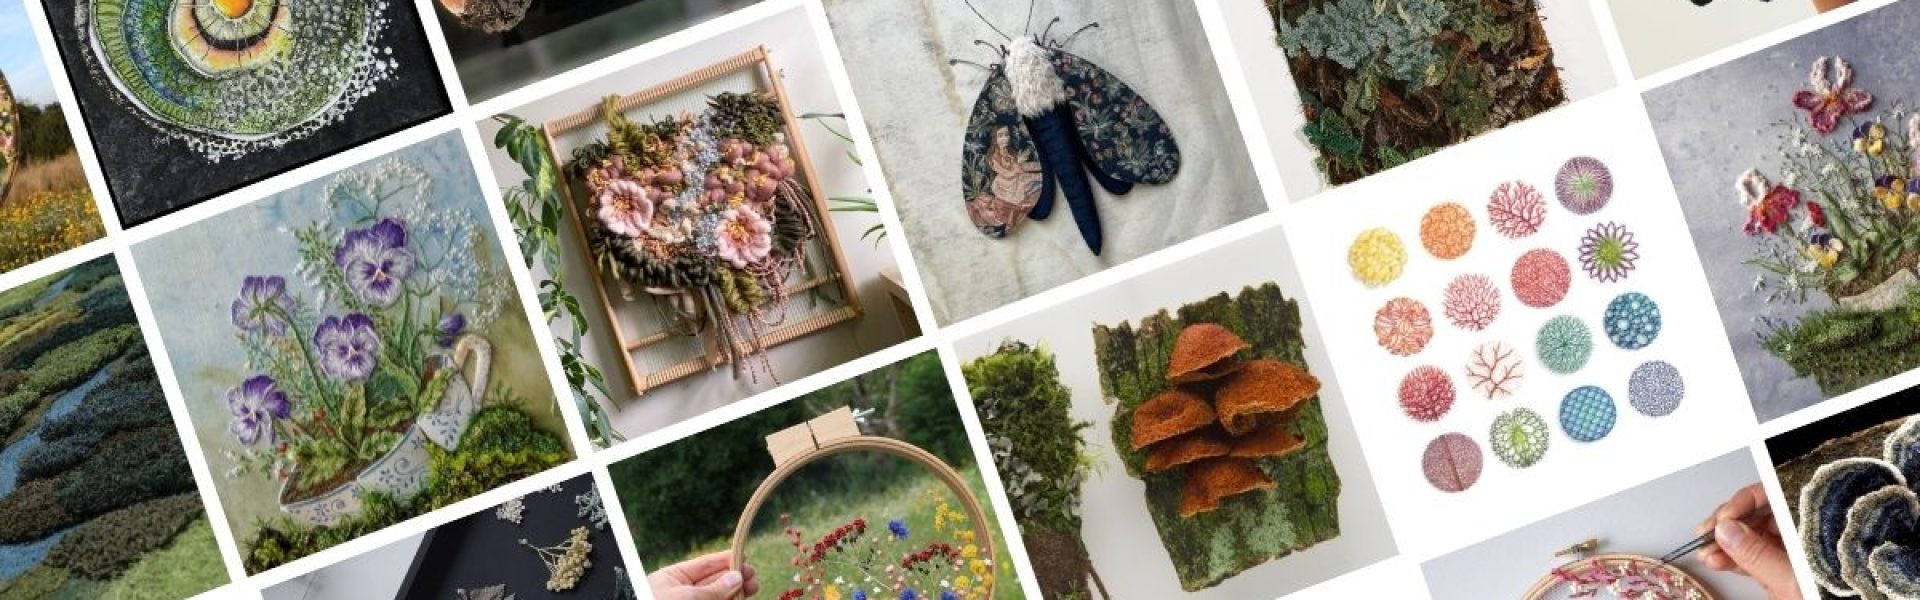 10 textile artists inspired by nature that you have to follow